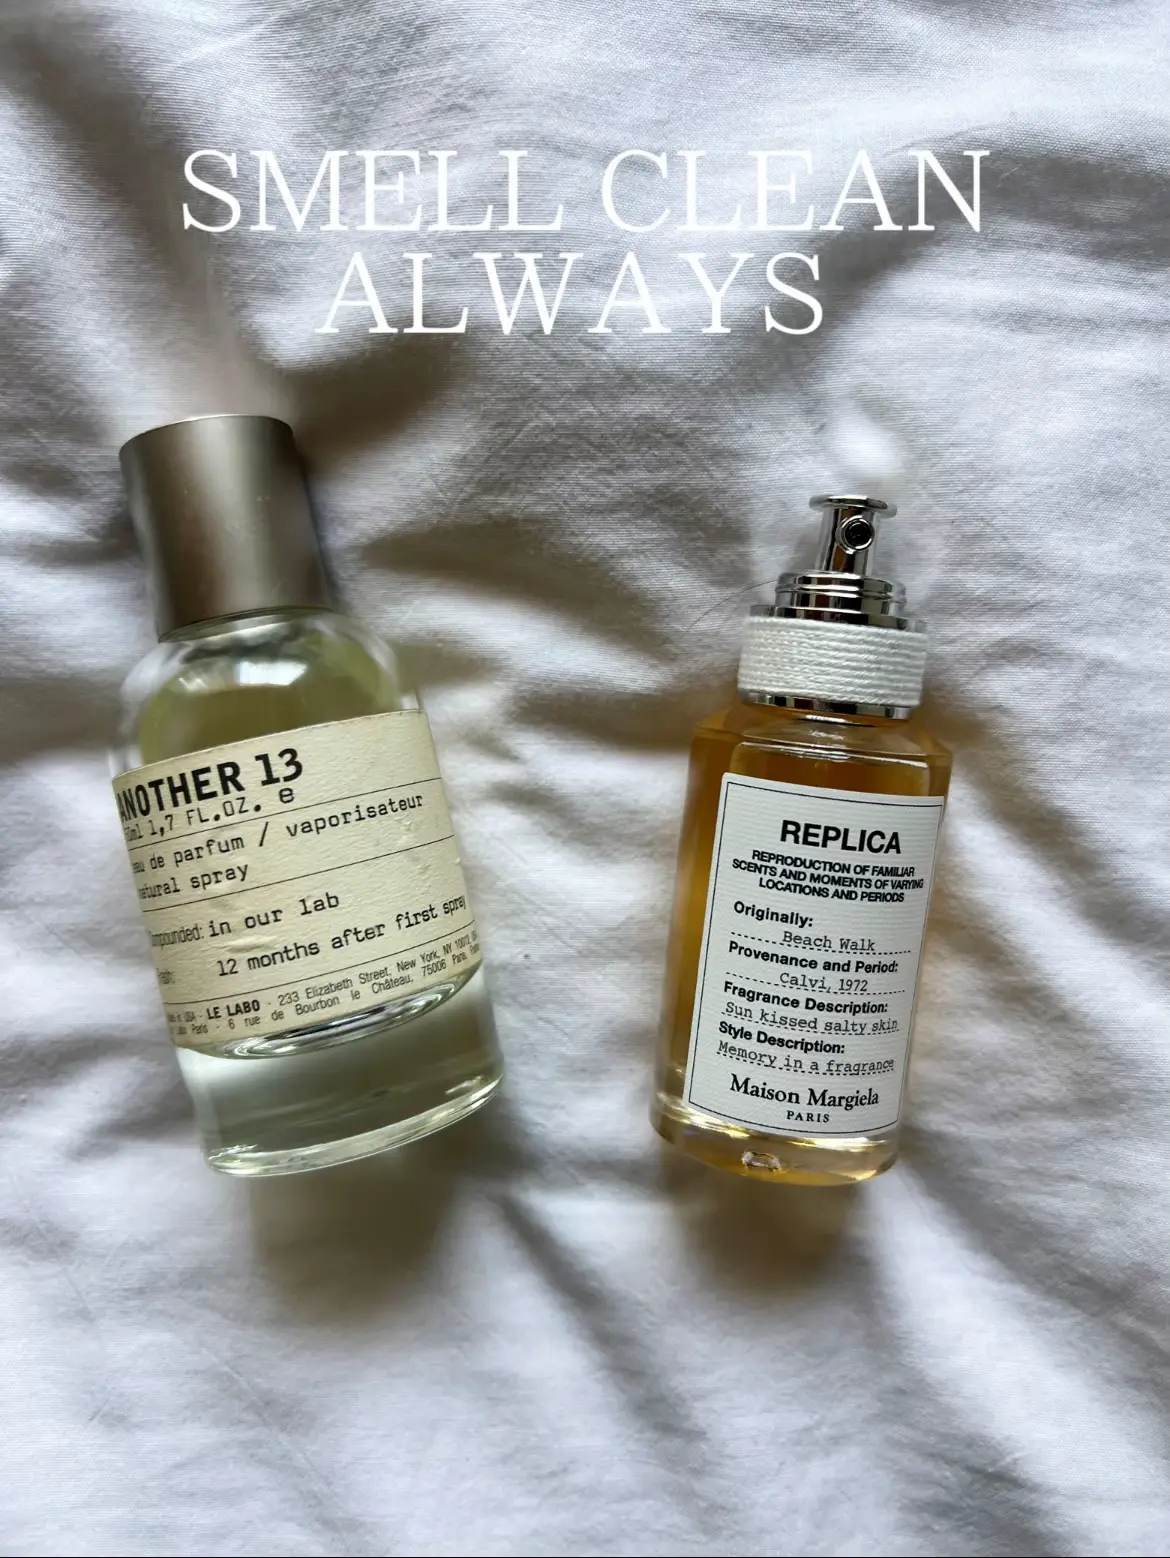 Smell Clean Always | Gallery posted by Girlnamedjazz | Lemon8